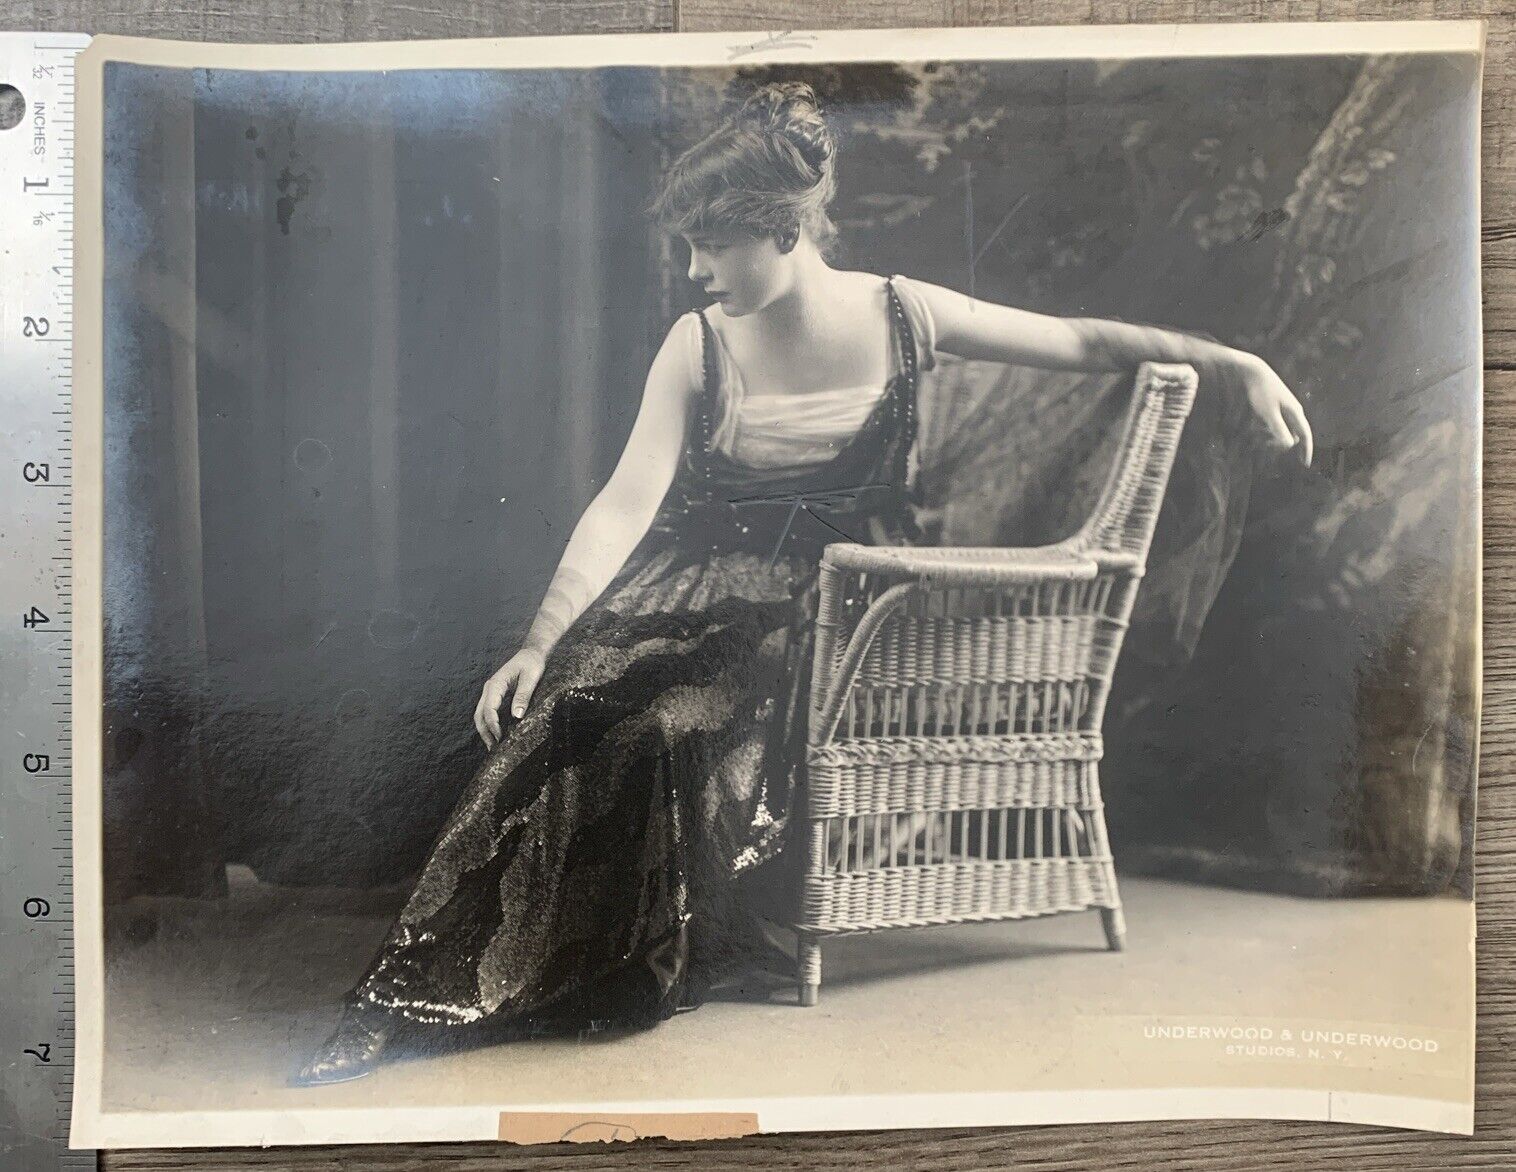 Vtg Press Photo 1914 Lily Cahill ‘Under Cover’ Cort Theatre Actress Sequin Dress